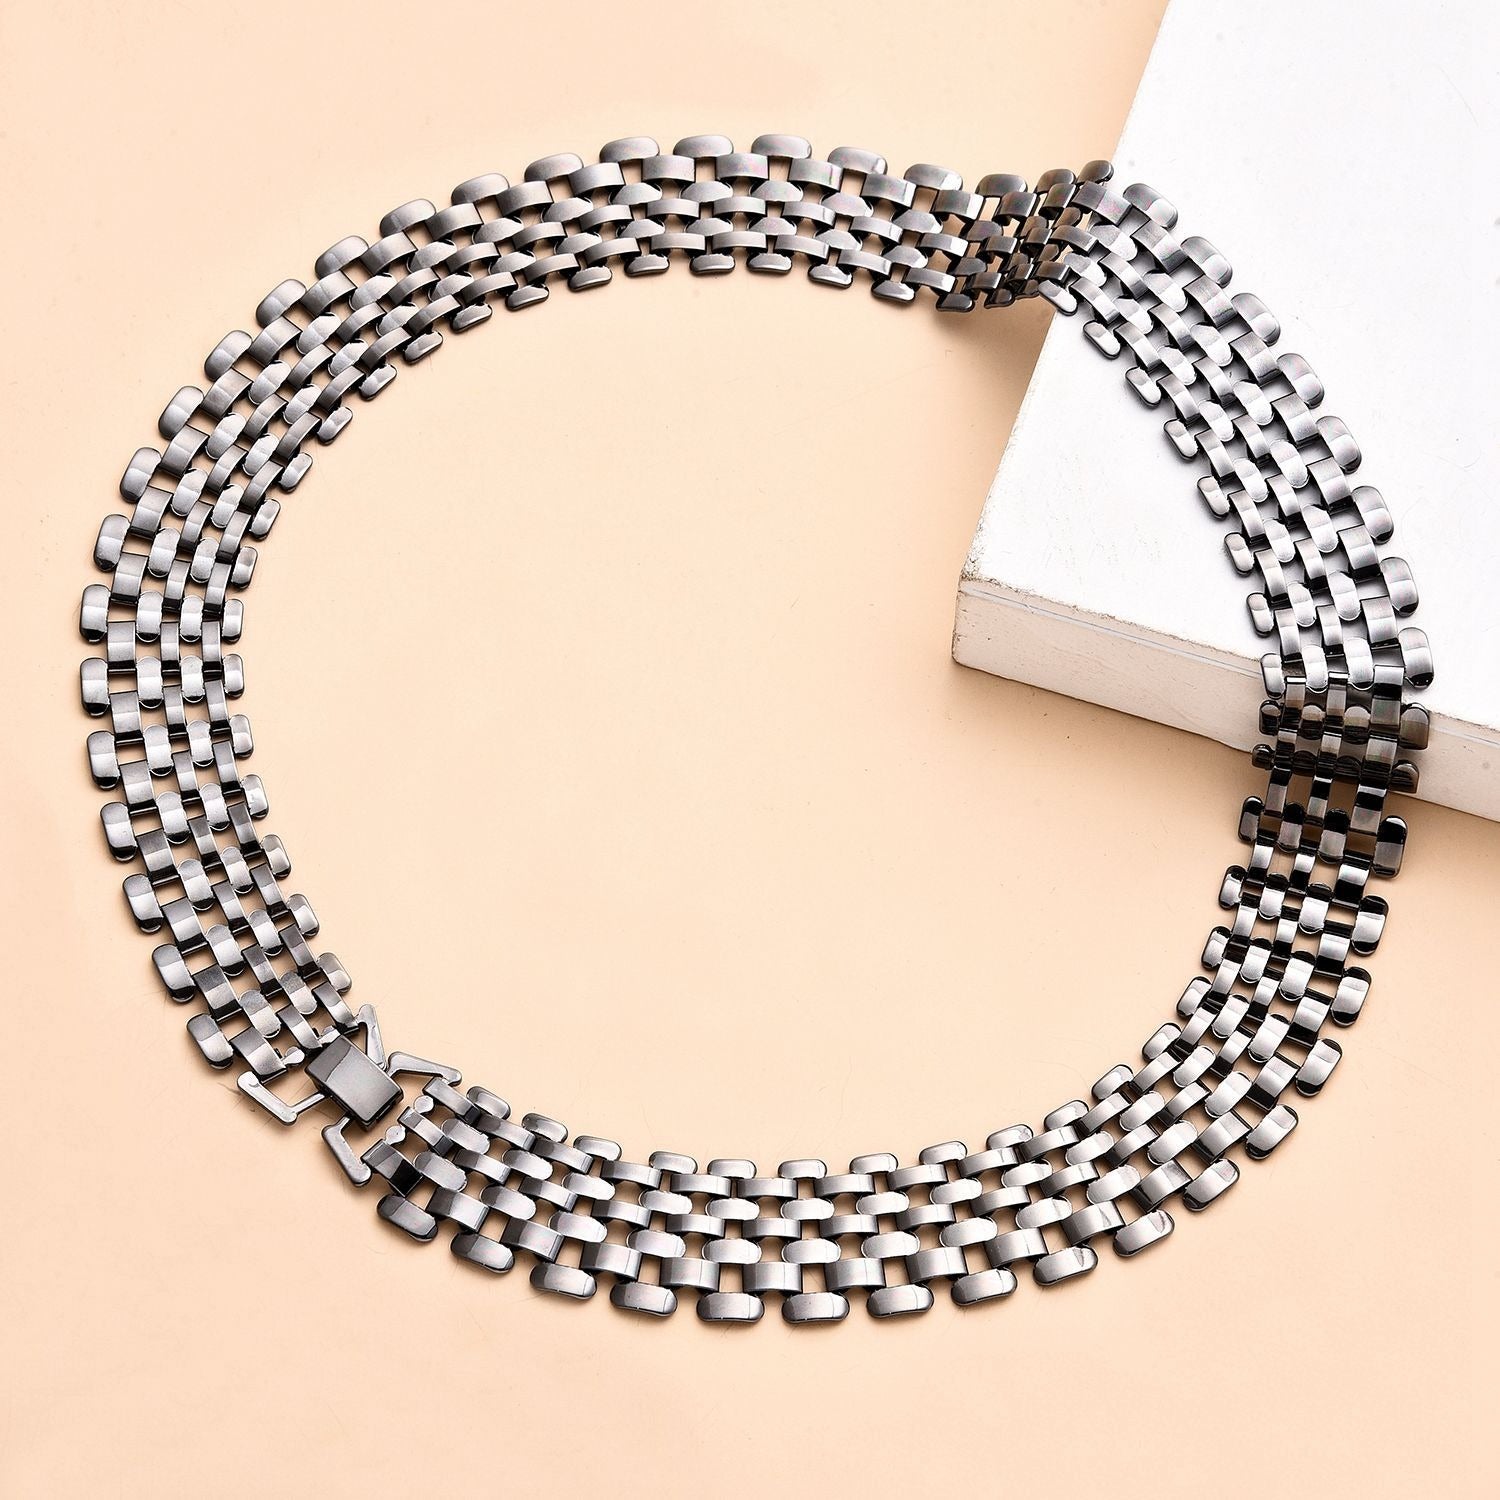 Hollow chain necklace with a silver wide chain for women